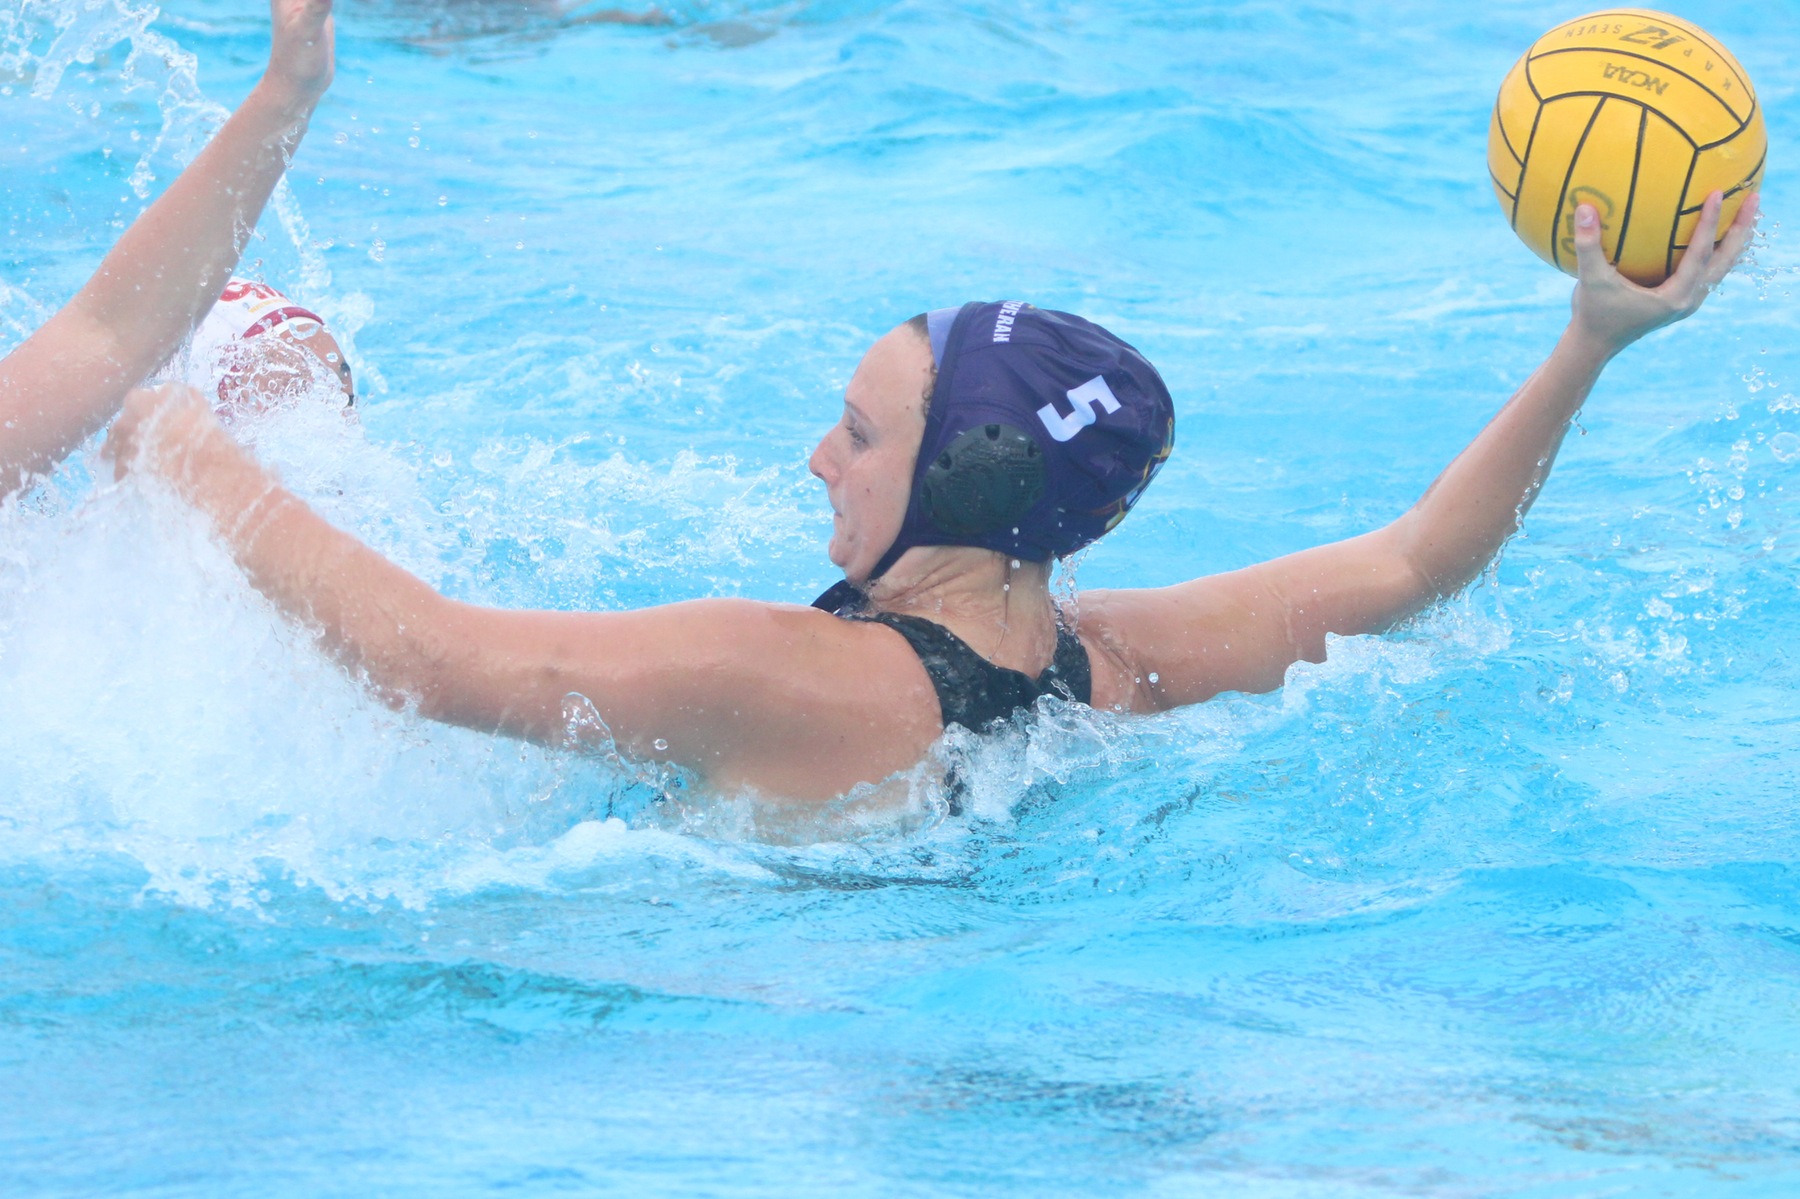 Victoria Rose Meek scores one of her two goals as Regals defeat CMS 11-4.